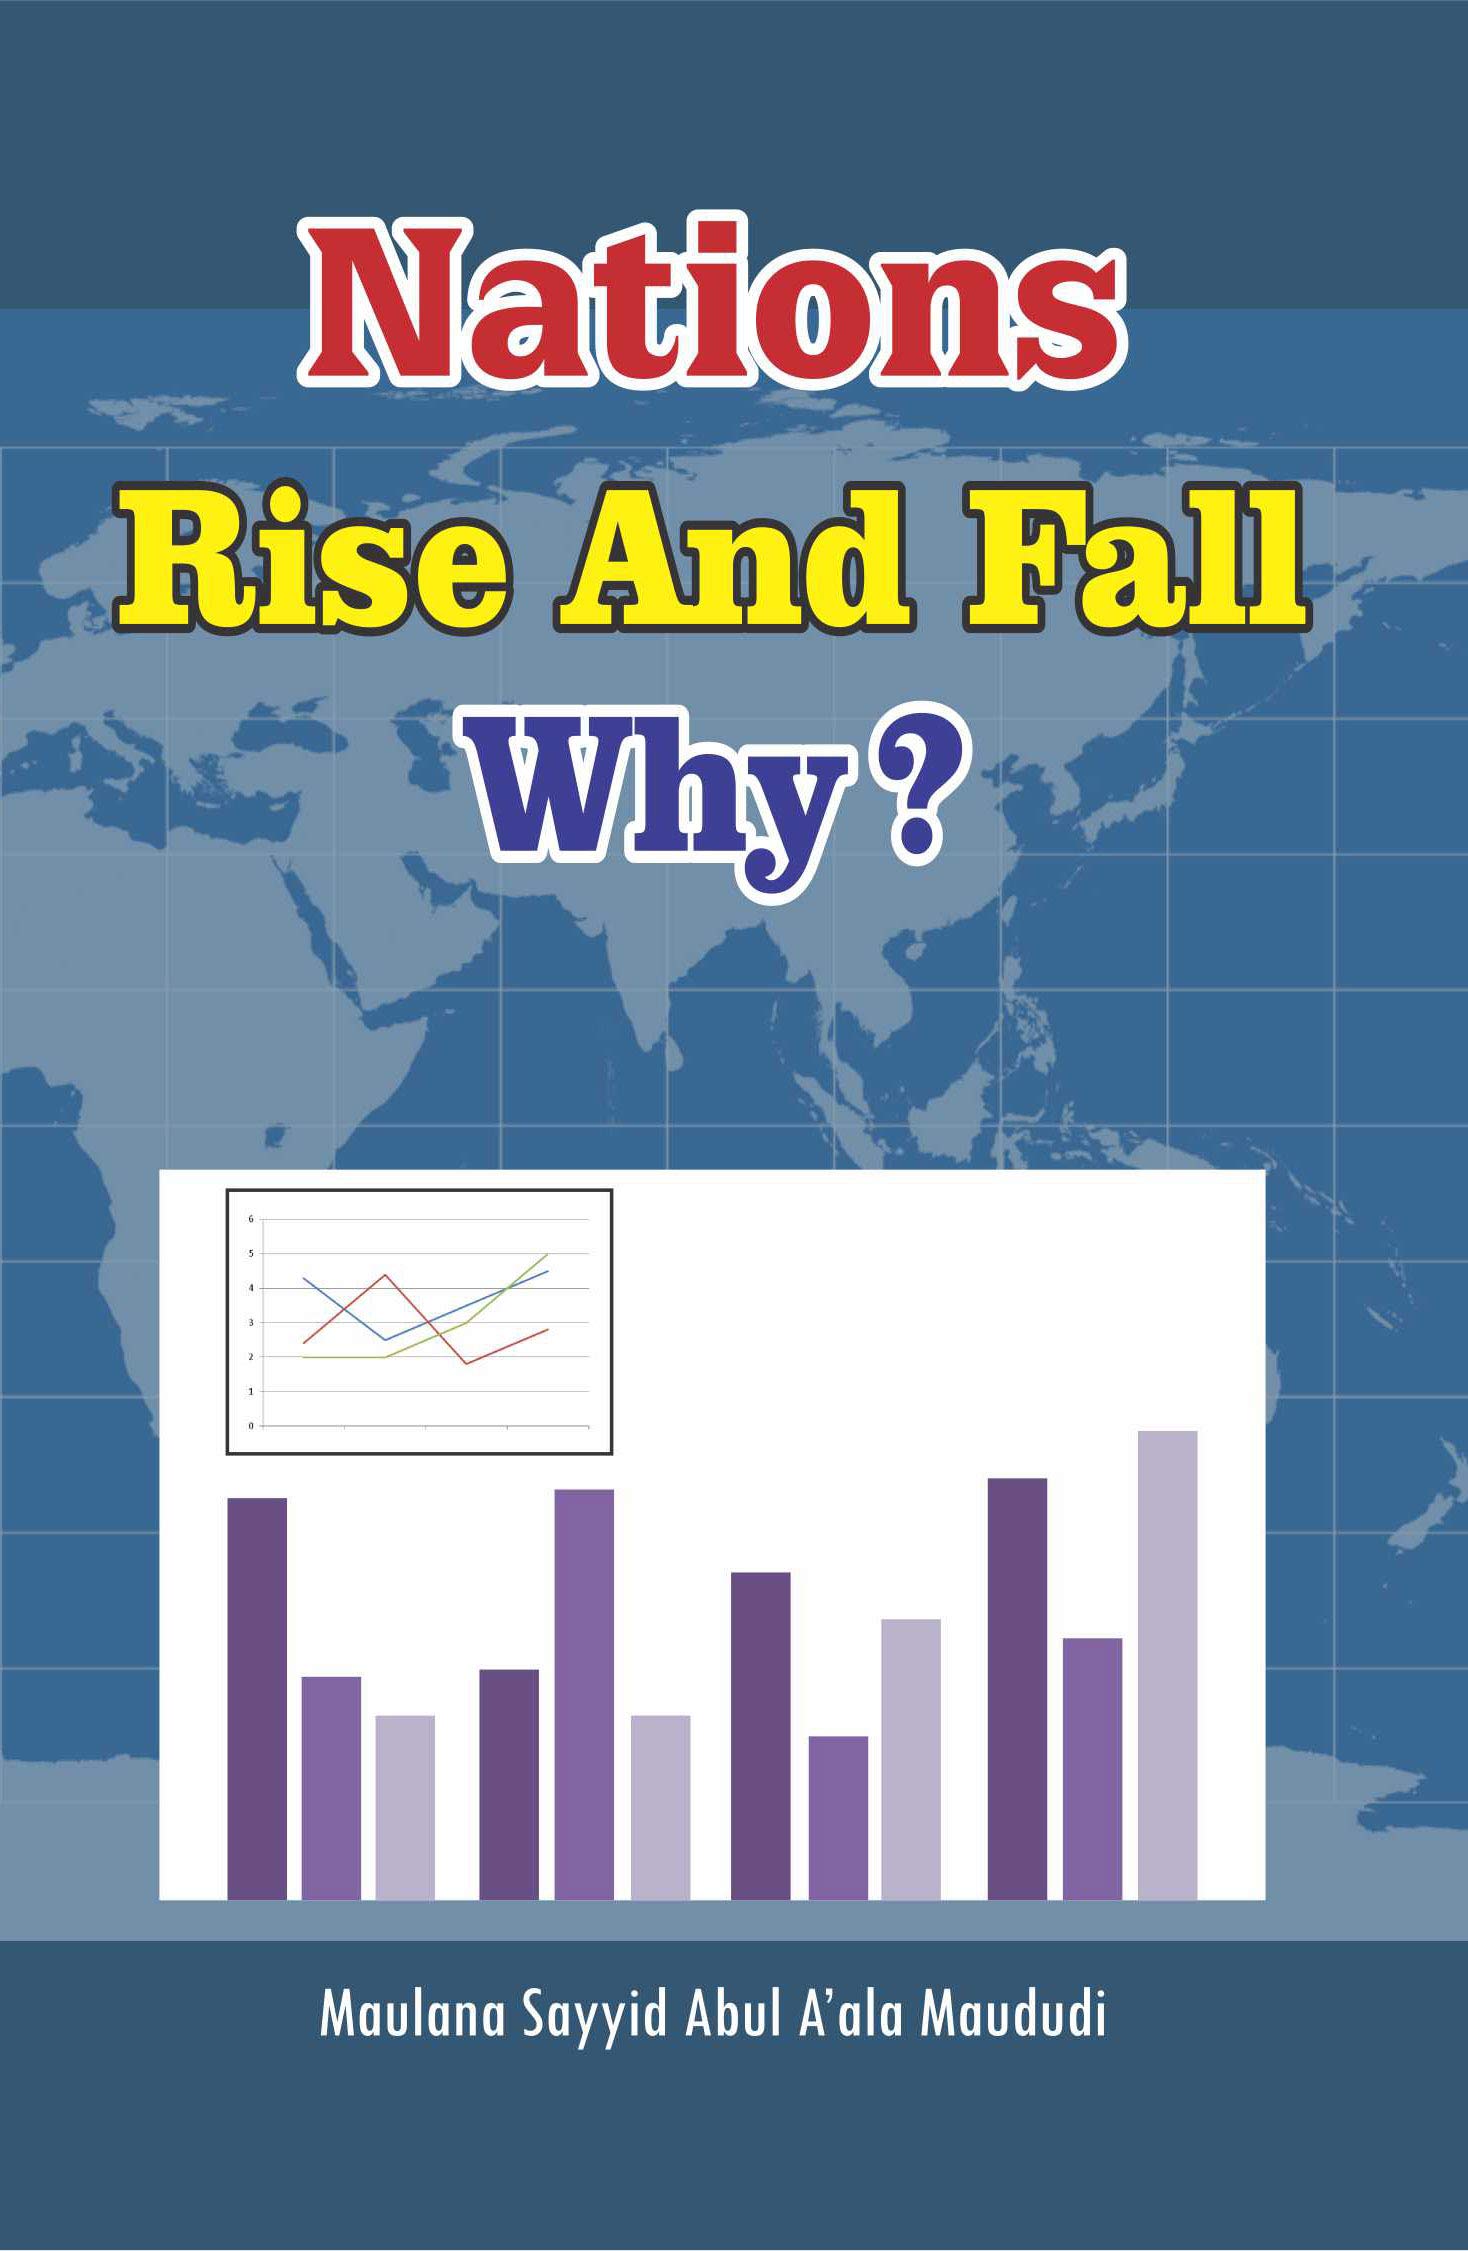 Nations Rise and Fall Why?